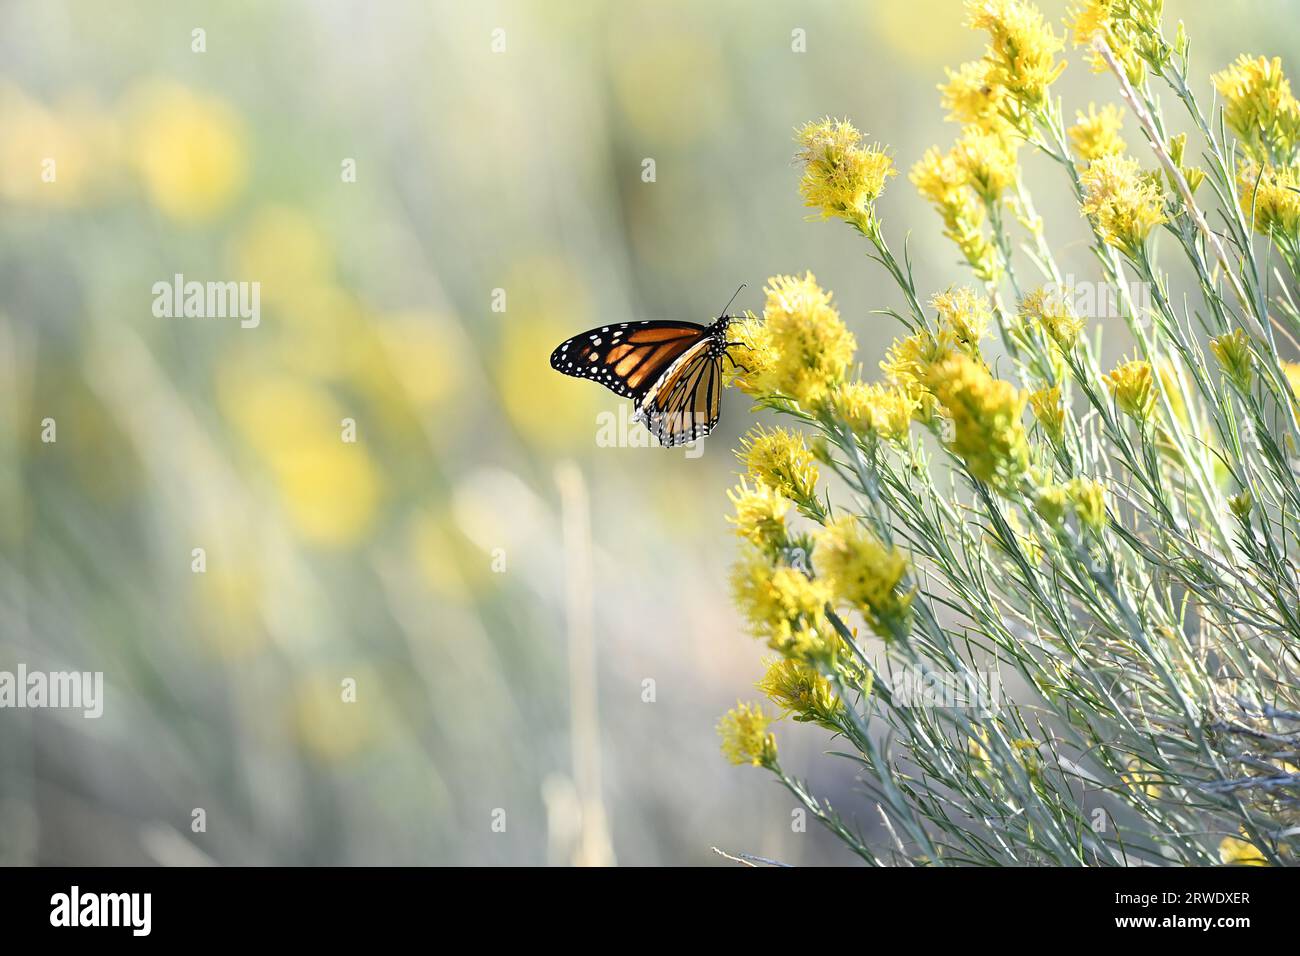 Monarch Butterfly Enjoying Nectar from Wildflower Stock Photo